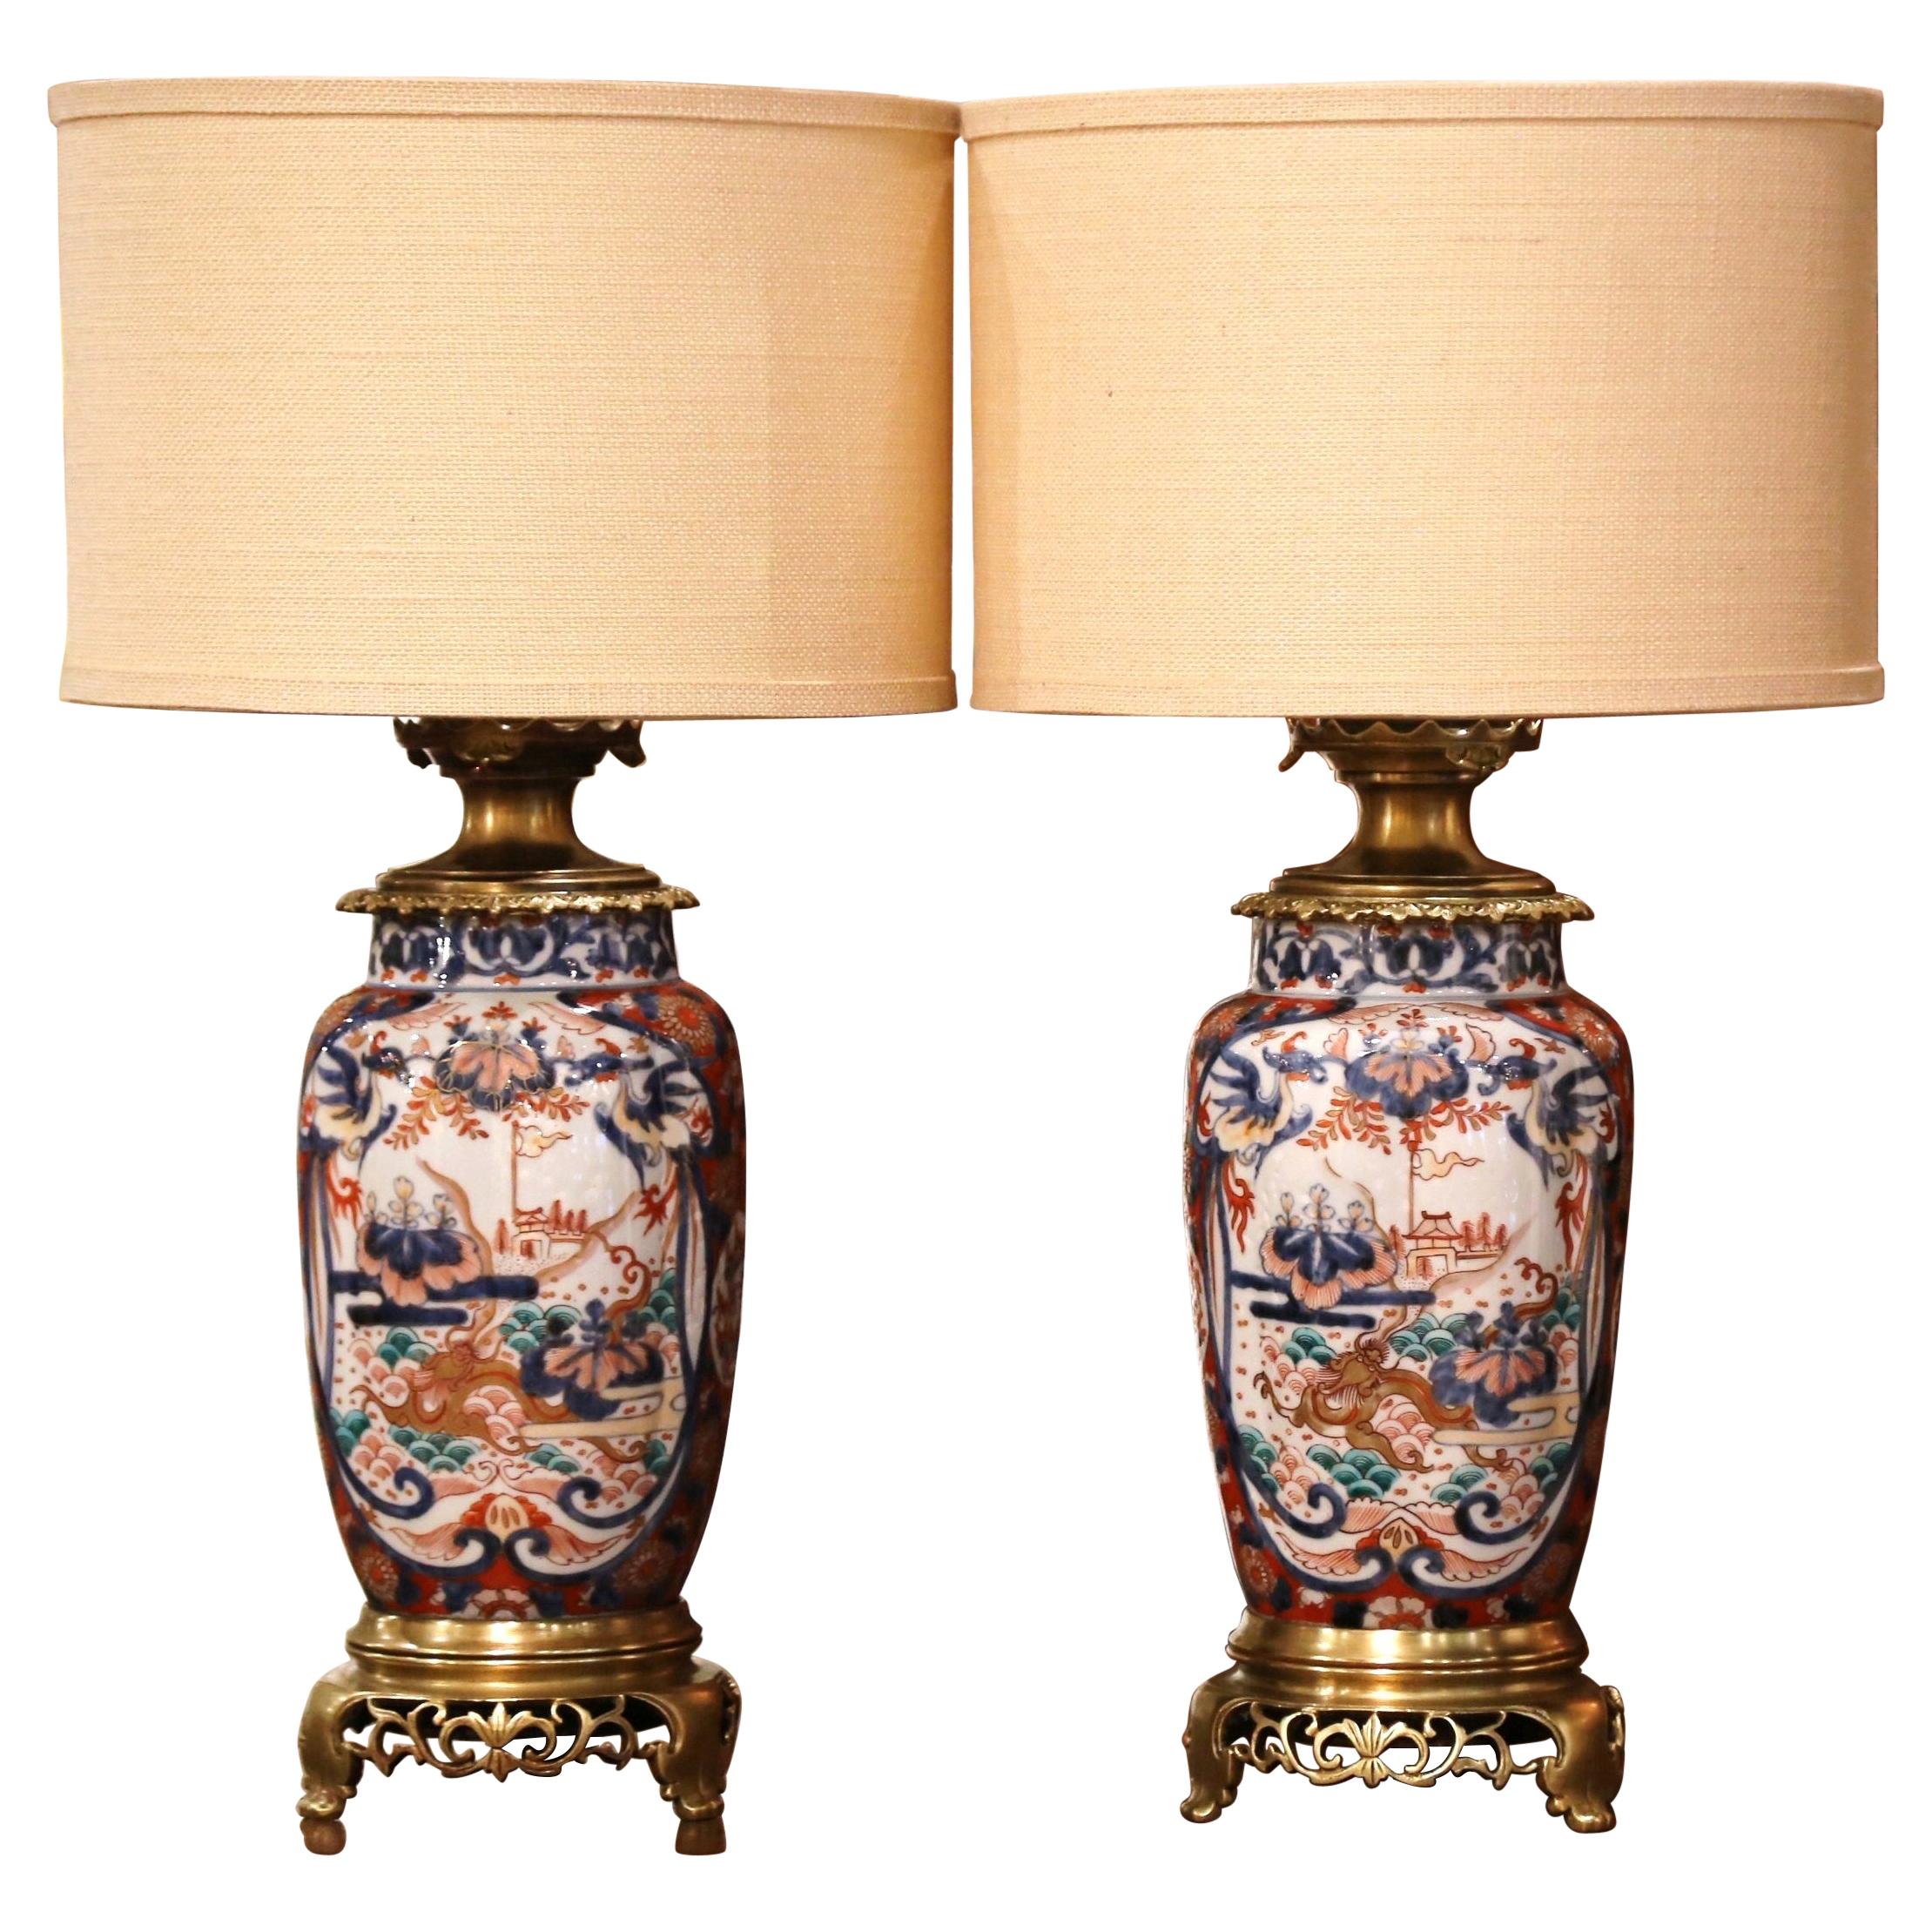 Pair of 19th Century French Imari Hand Painted Porcelain and Bronze Table Lamps